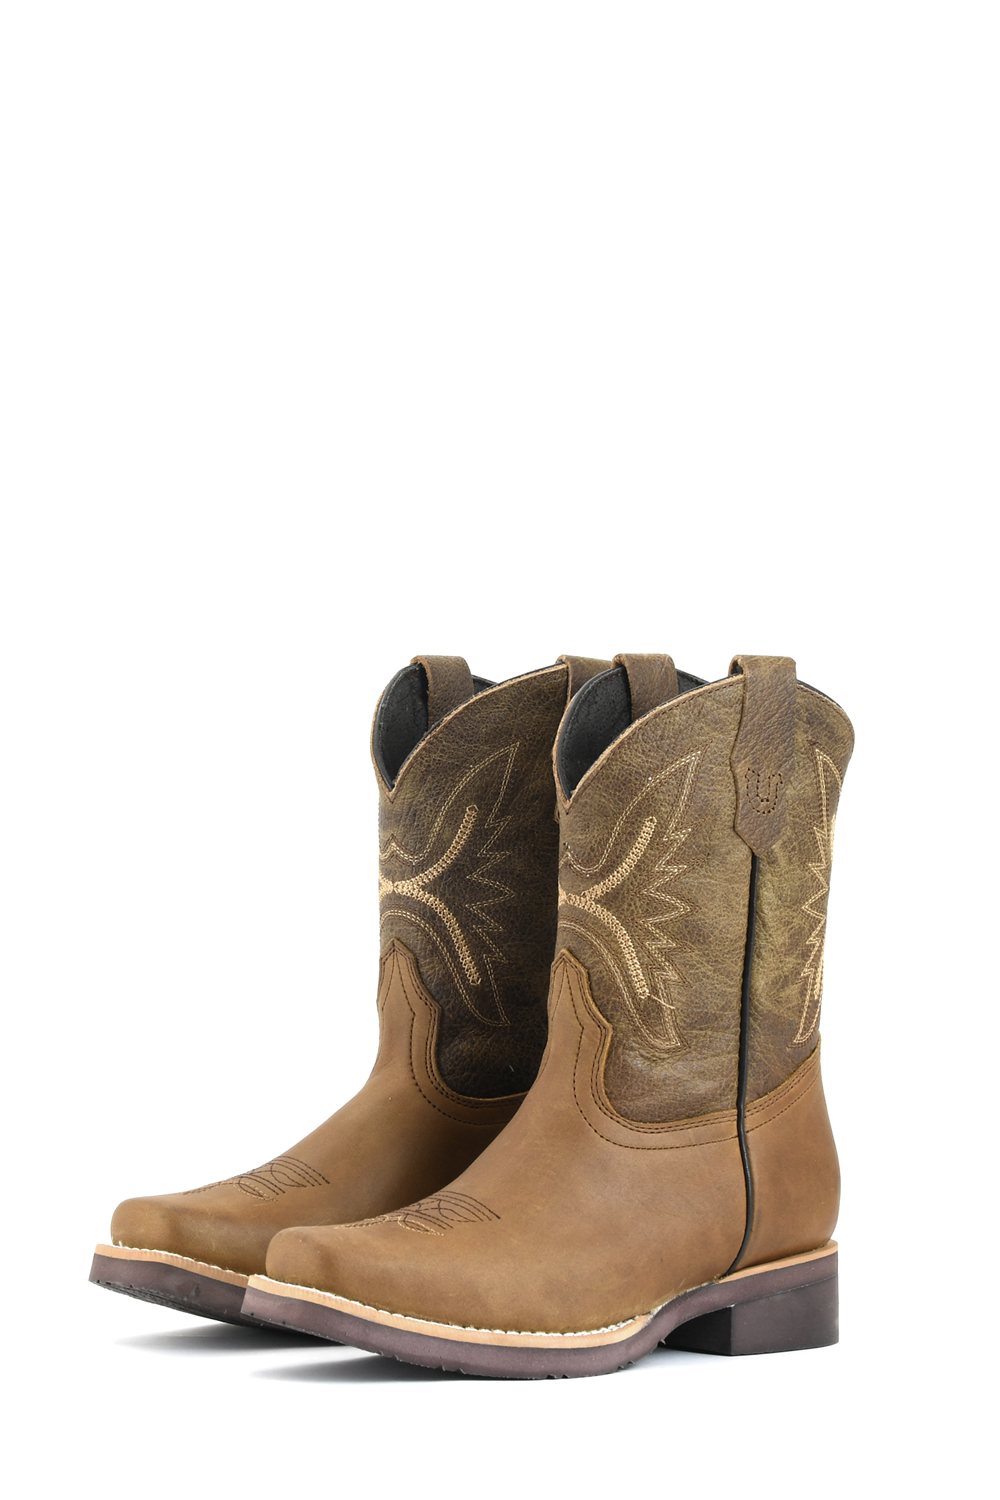 Our Products | Two Free Boots